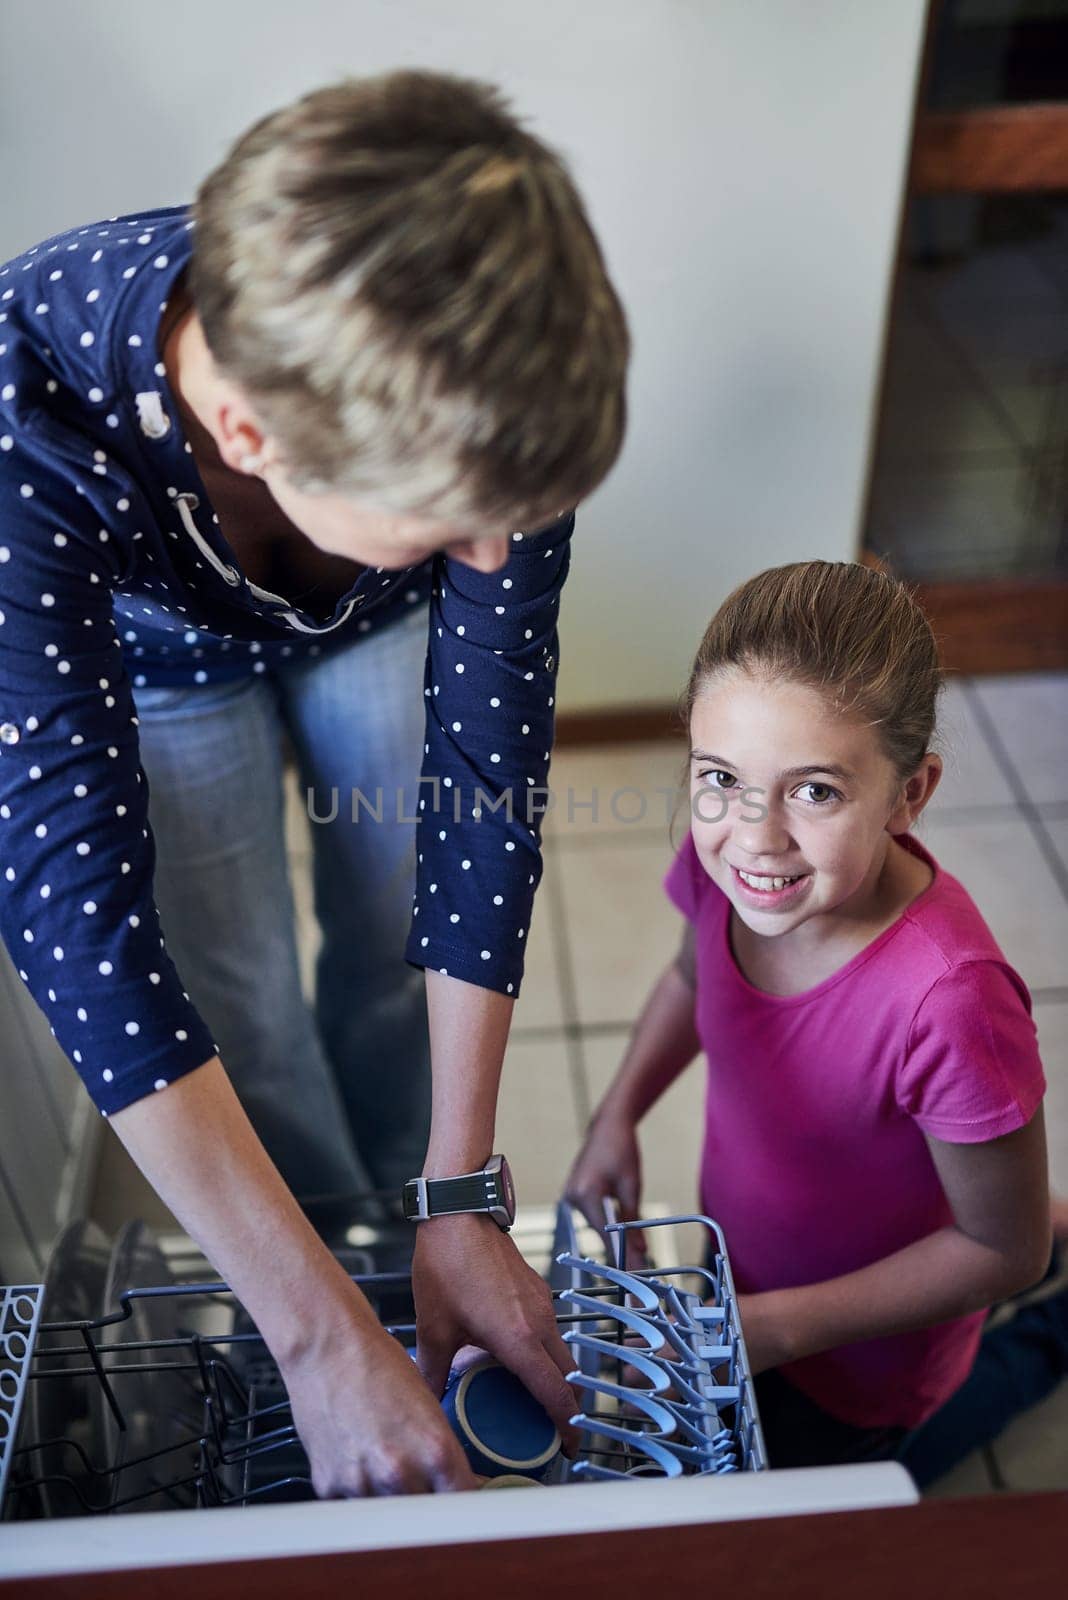 Dishwasher, mother and daughter in portrait cleaning kitchen together with help, learning or teaching. Housework, mom and girl in home washing dishes in machine with smile, support and morning chores.